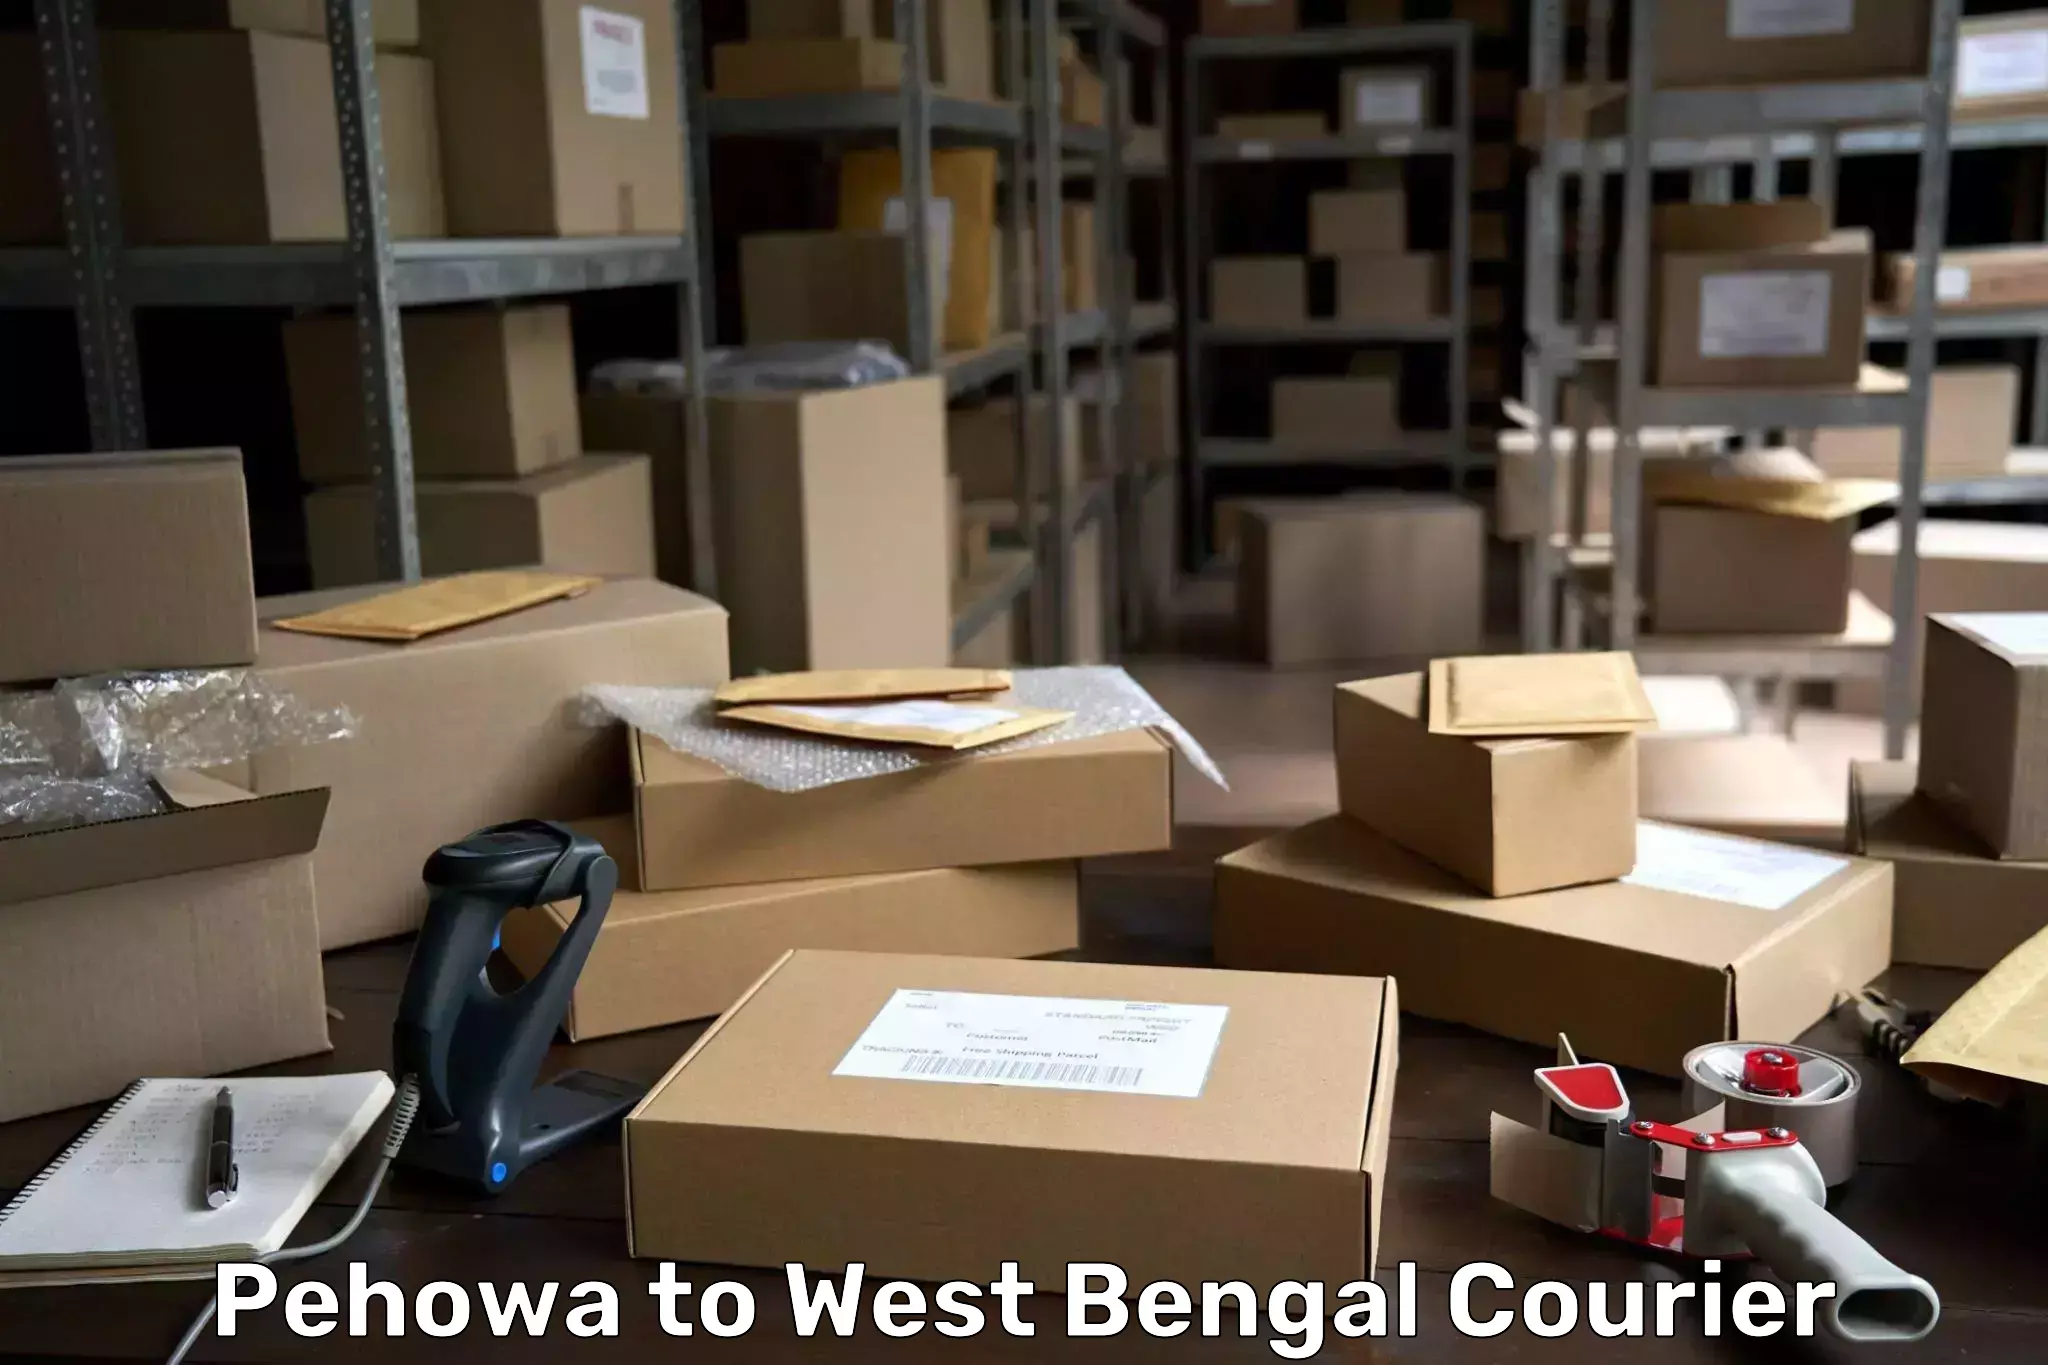 Cash on delivery service Pehowa to West Bengal